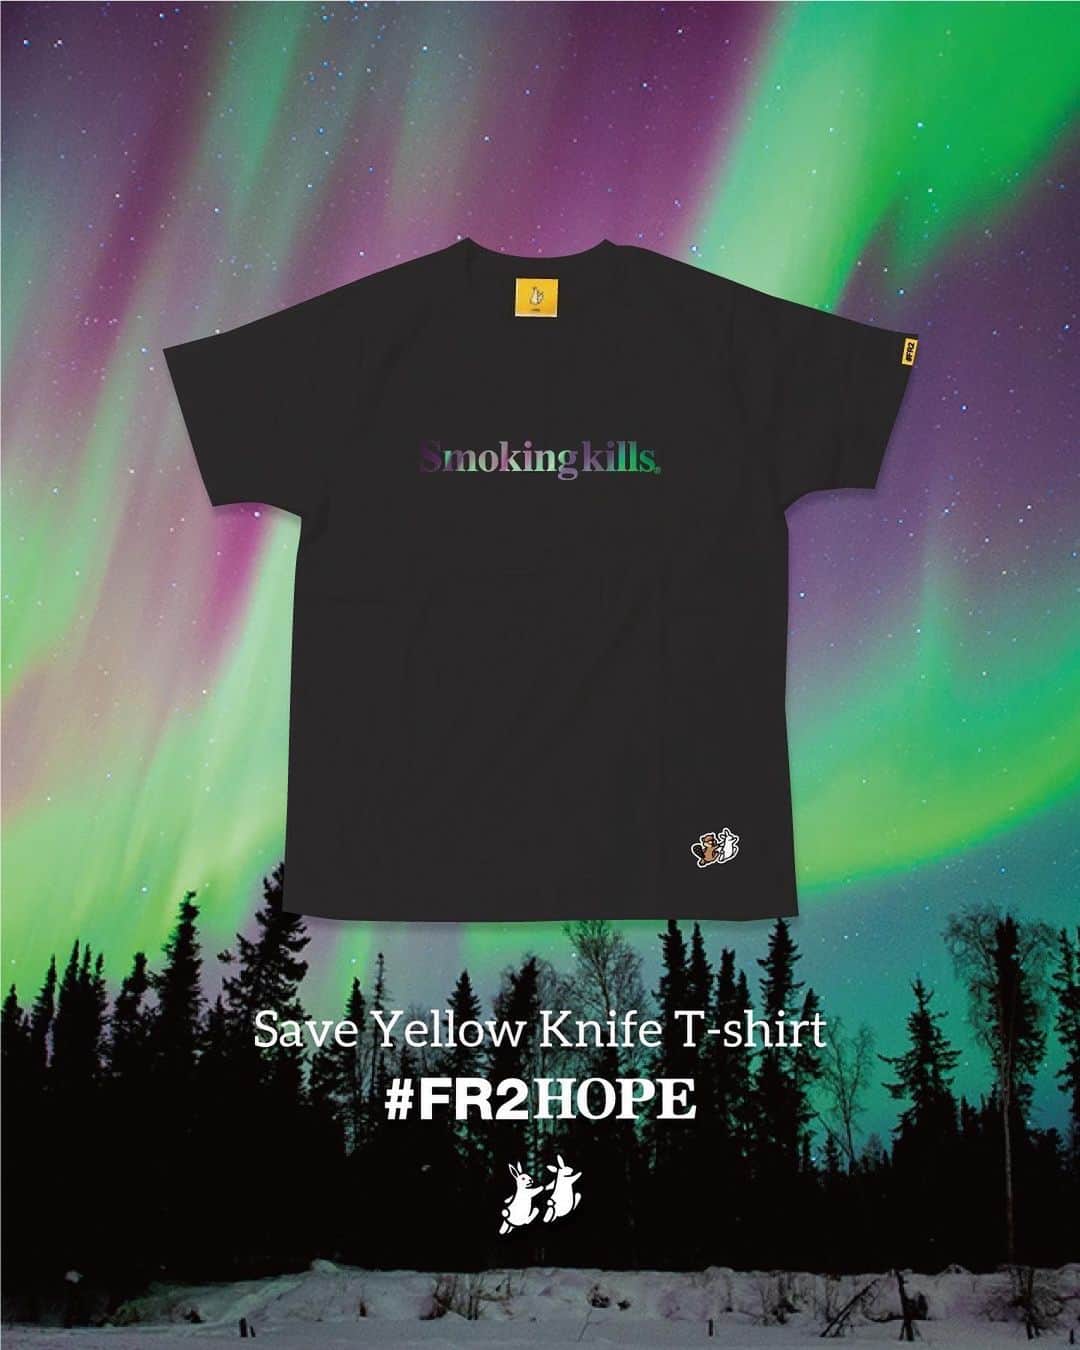 #FR2さんのインスタグラム写真 - (#FR2Instagram)「As a #FR2 hope project, we will support the fire that occurred in British Columbia, Canada. Starting today, we will start accepting orders at the #FR2 Online Store. All of the product sales, minus the costs involved in the production of this project, will be donated to the Canadian Red Cross.  Order period: August 22nd (Tuesday) to 28th (Monday), 2023  #FR2希望 プロジェクトとして、カナダ・ブリティッシュコロンビア州で発生した火災への支援を行います。 本日から #FR2 Online Storeで受注販売を開始いたします。 こちらの企画の制作にかかわるコストを引いた商品の売上の全ては、Canadian Red Crossに寄付します。  受注期間：2023年8月22日（火）～28日（月）  作为 #FR2 希望项目，我们将支持加拿大不列颠哥伦比亚省发生的火灾。 从今天开始，我们将开始在 #FR2 在线商店接受订单。 所有产品销售，减去该项目的生产成本，将捐赠给加拿大红十字会。  订购日期：2023年8月22日（星期二）至28日（星期一）  作為 #FR2 希望項目，我們將支持加拿大不列顛哥倫比亞省發生的火災。 從今天開始，我們將開始在 #FR2 在線商店接受訂單。 所有產品銷售，減去該項目的生產成本，將捐贈給加拿大紅十字會。  訂購日期：2023年8月22日（星期二）至28日（星期一）  #FR2希望 #FR2HOPE」8月22日 11時25分 - fxxkingrabbits